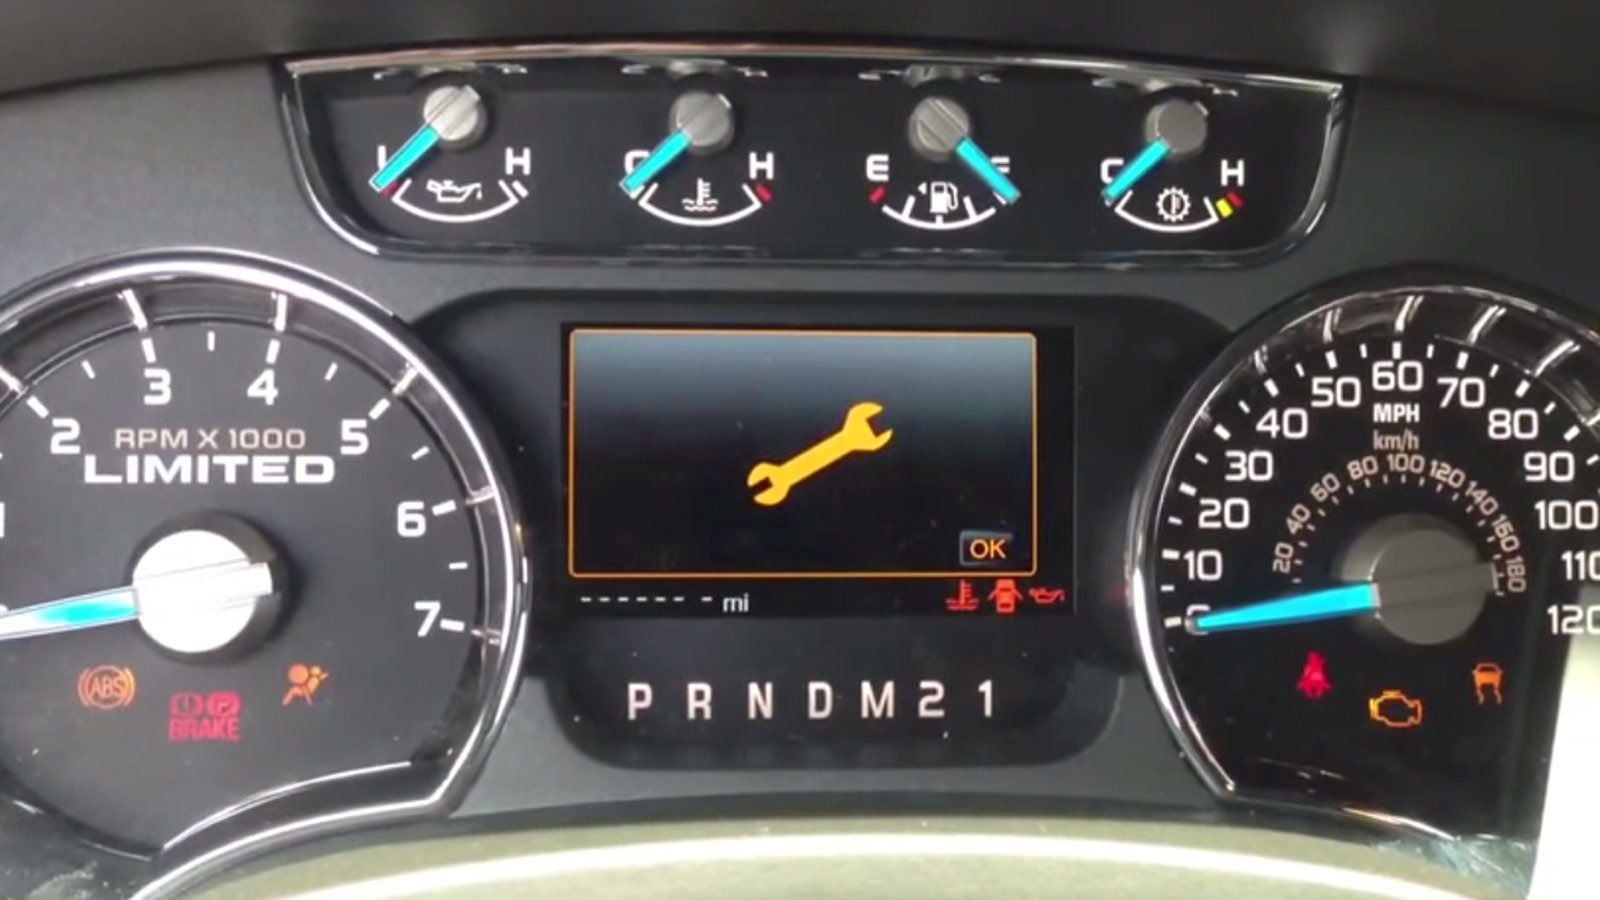 F150 F250: Why is My Transmission Fault Light On? - Ford-Trucks Why Does My Ford Ranger Go Into Limp Mode